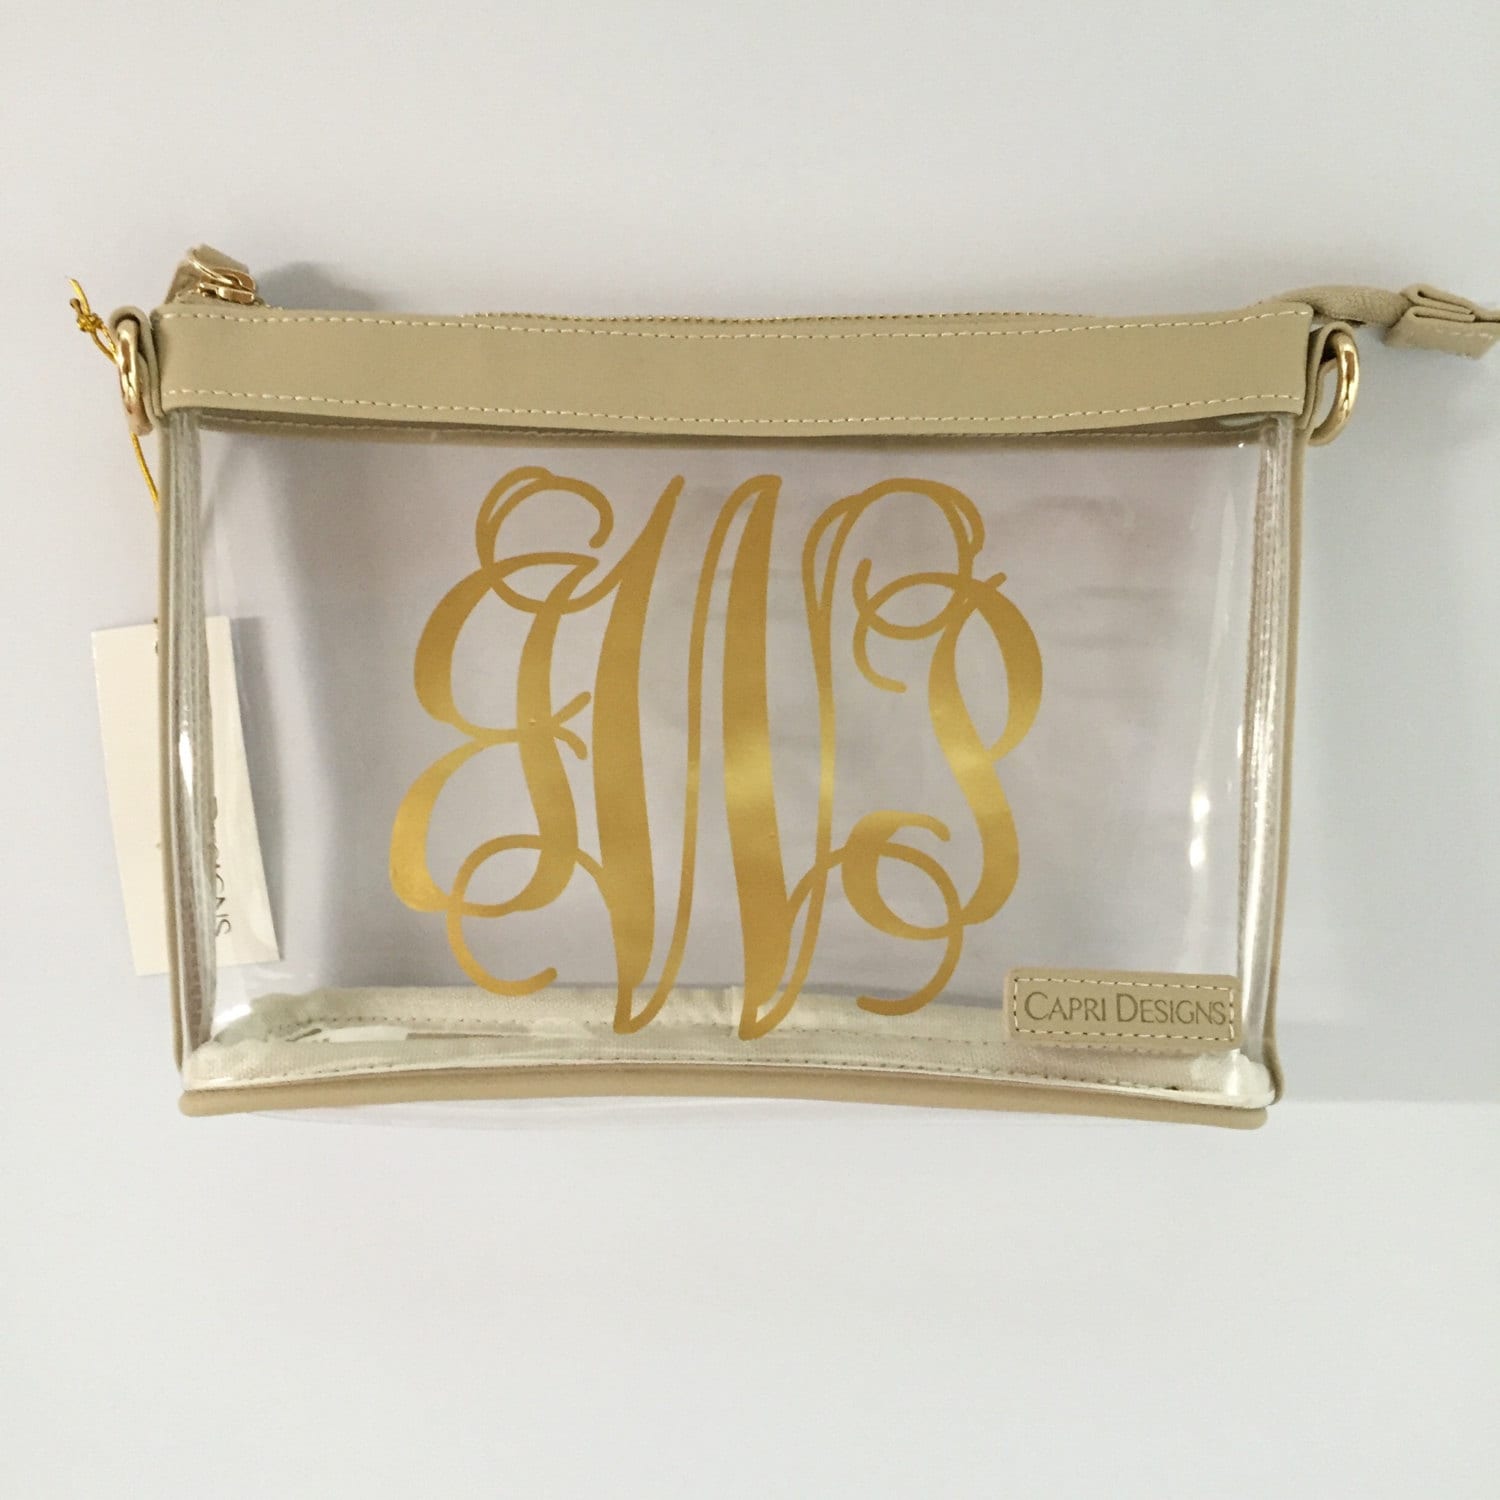 Clear Stadium Approved Purse 